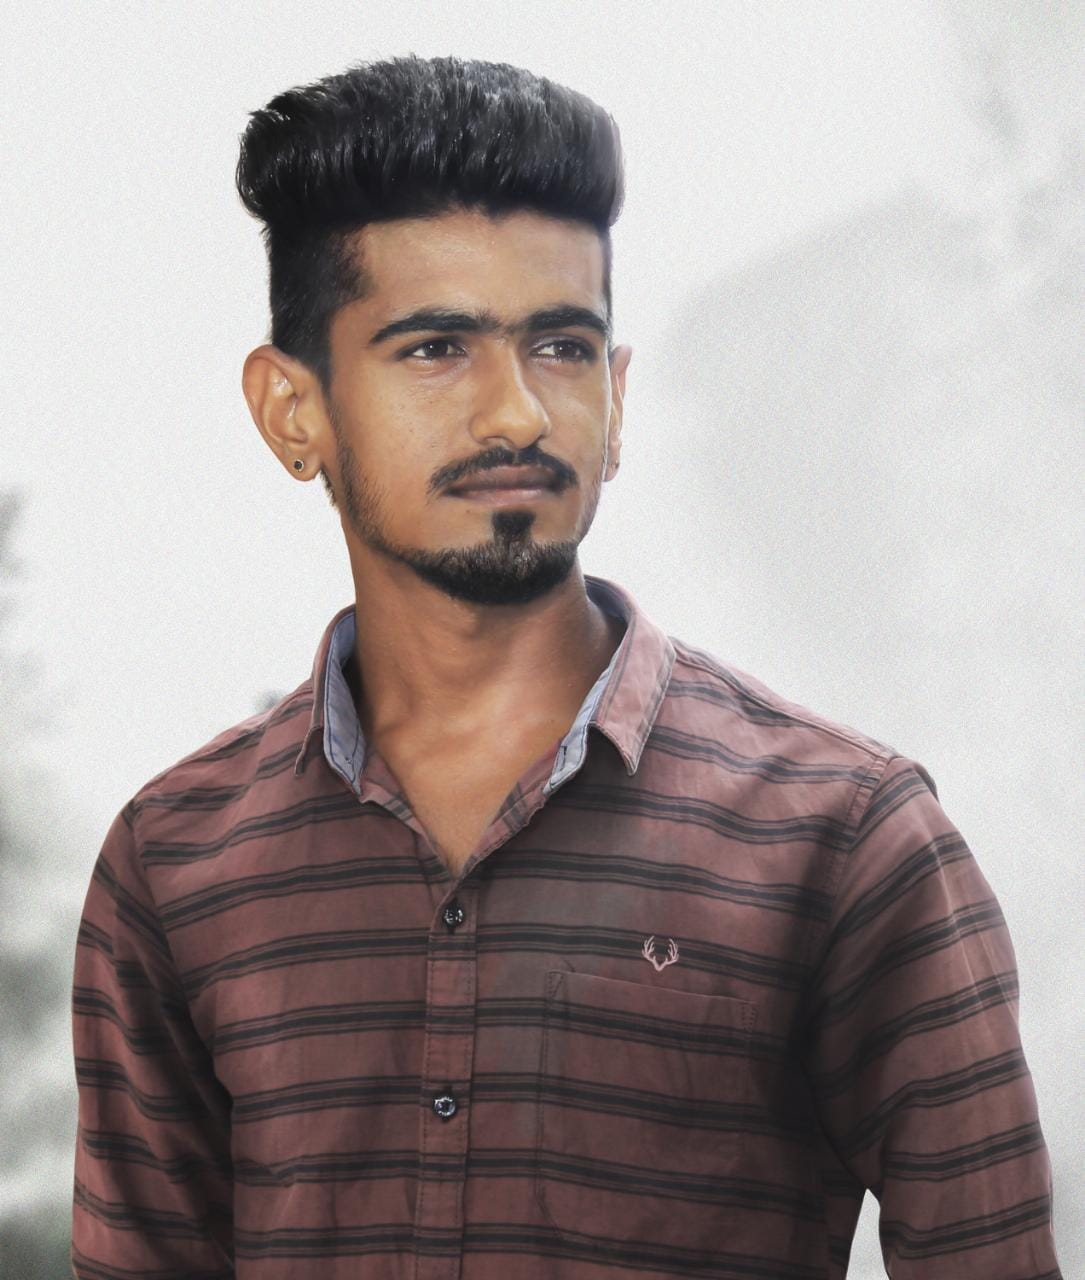 Meet Teju Jangid, An Indian artist whose digital artworks are going viral on the Internet